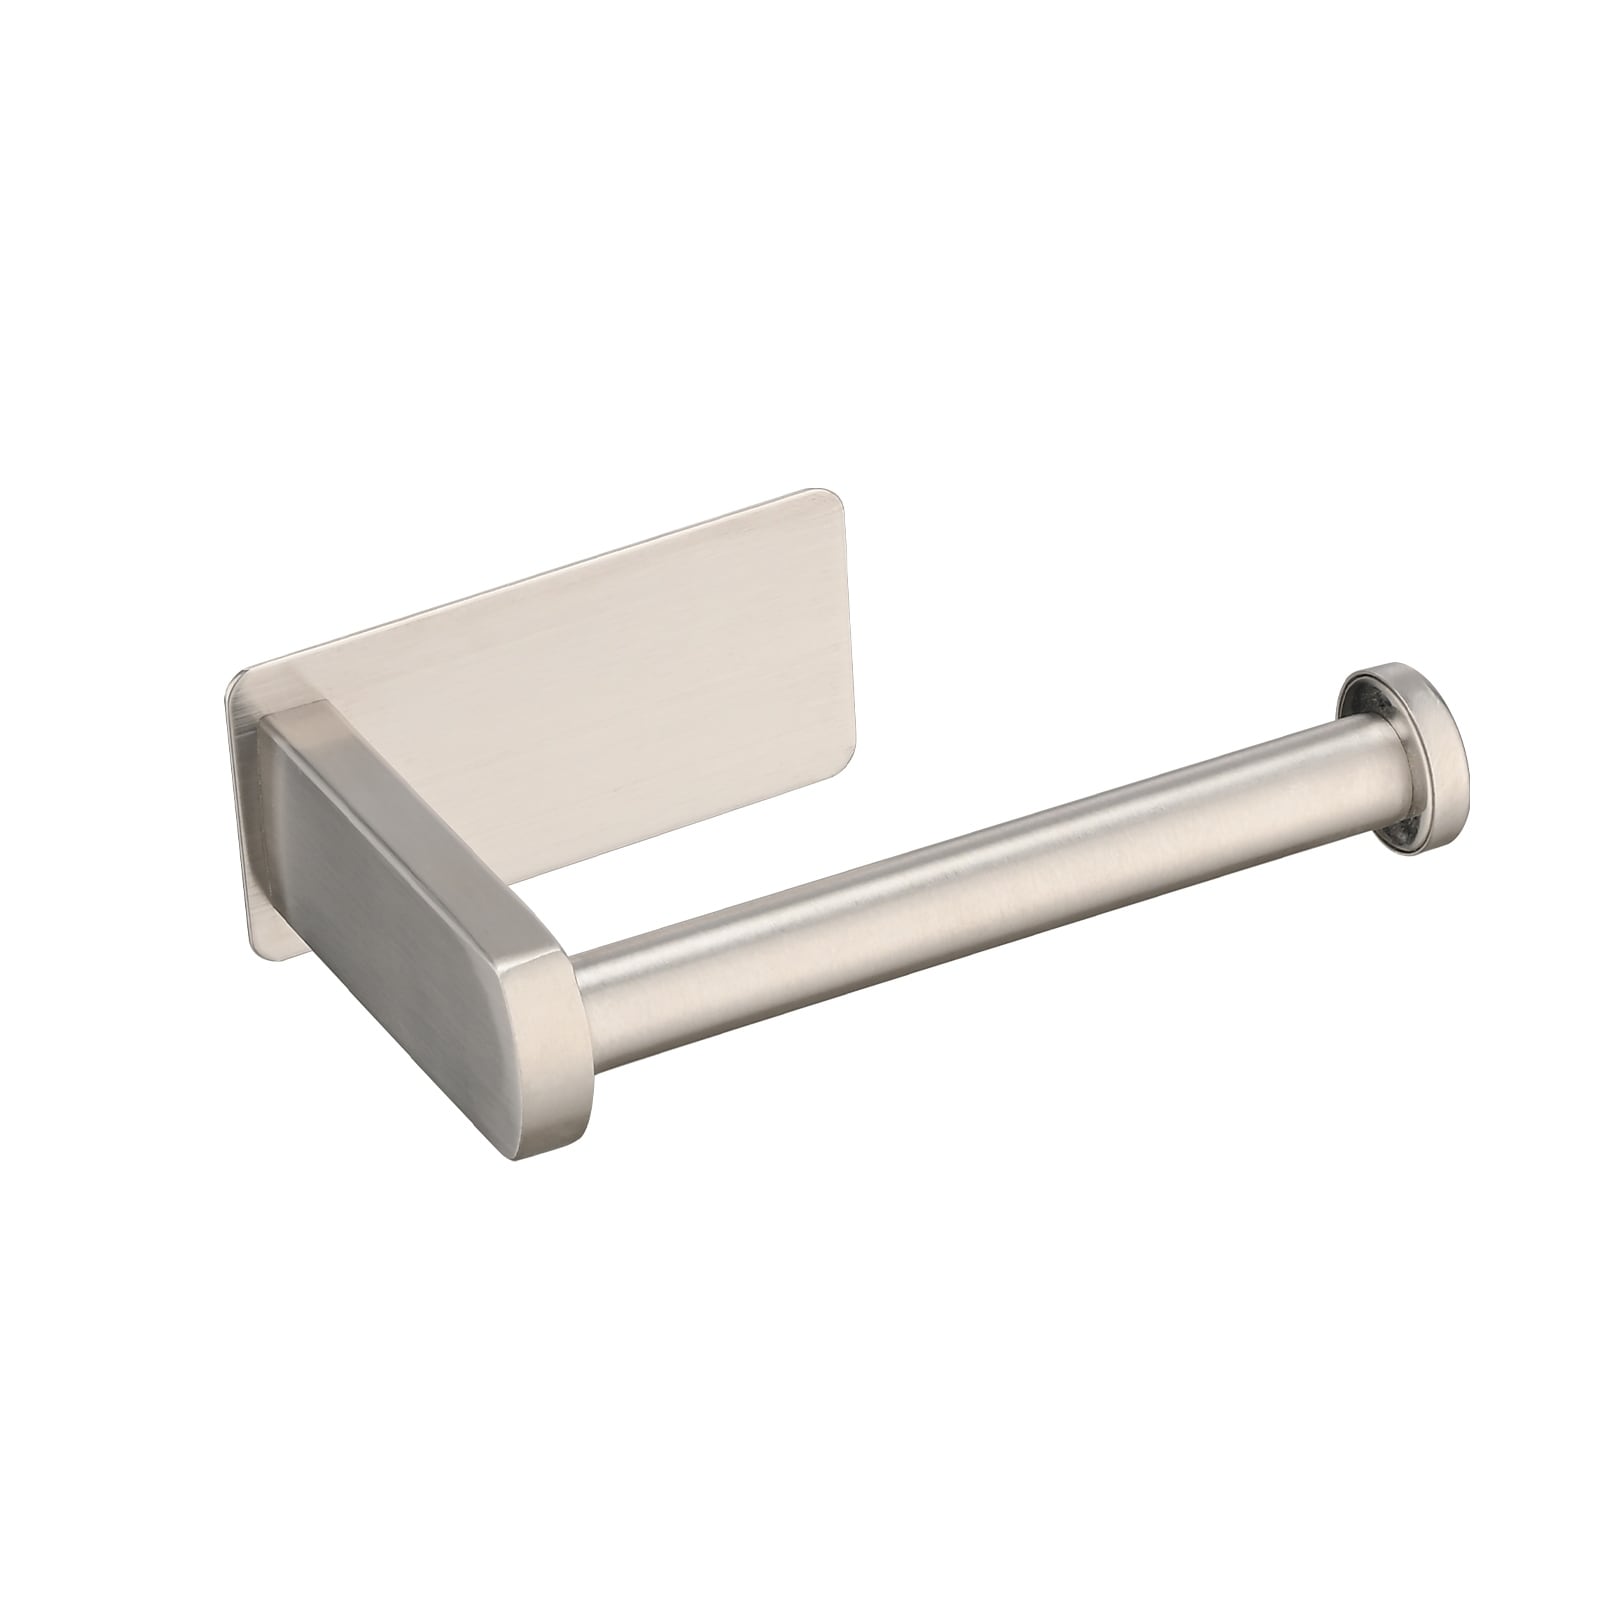 https://ak1.ostkcdn.com/images/products/is/images/direct/1e9625ff537e81e04dc6bbd4dc8763c4c887d7f6/Toilet-Paper-Holder-Self-Adhesive%2C-Stainless-Steel-Rustproof-Adhesive-Toilet-Roll-Holder-no-Drilling.jpg